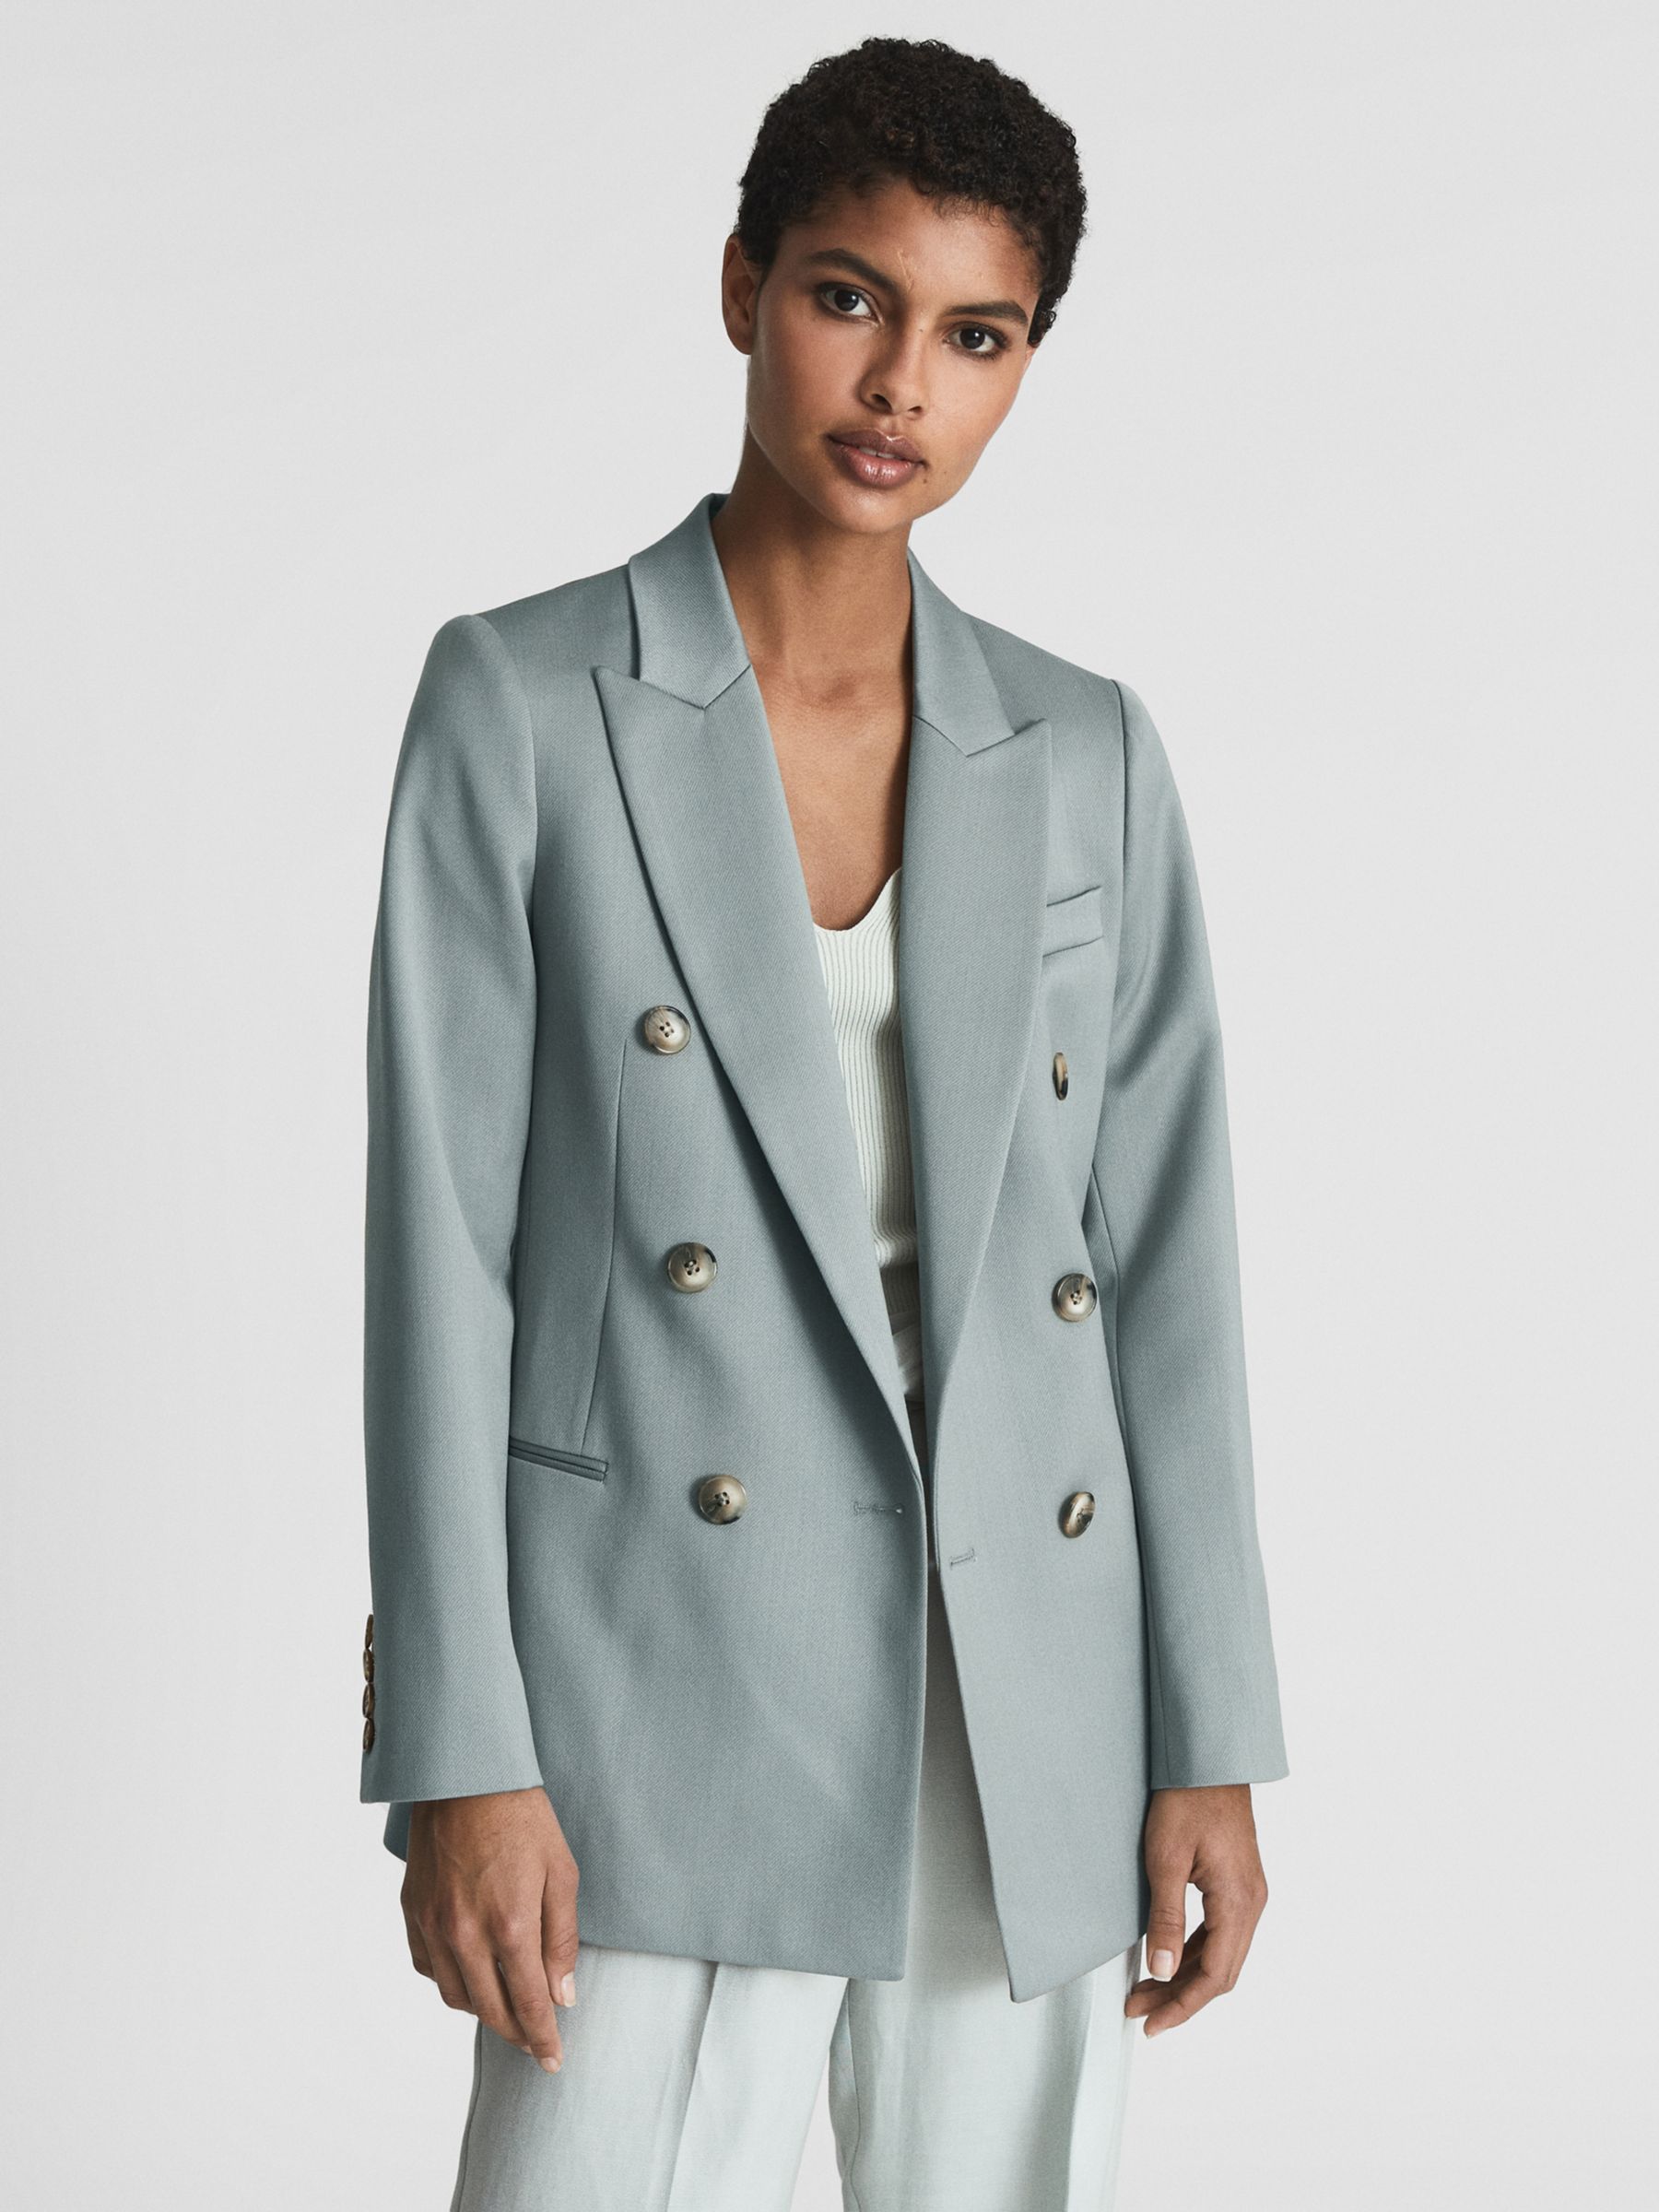 Reiss Skye Double Breasted Blazer, Sage at John Lewis & Partners